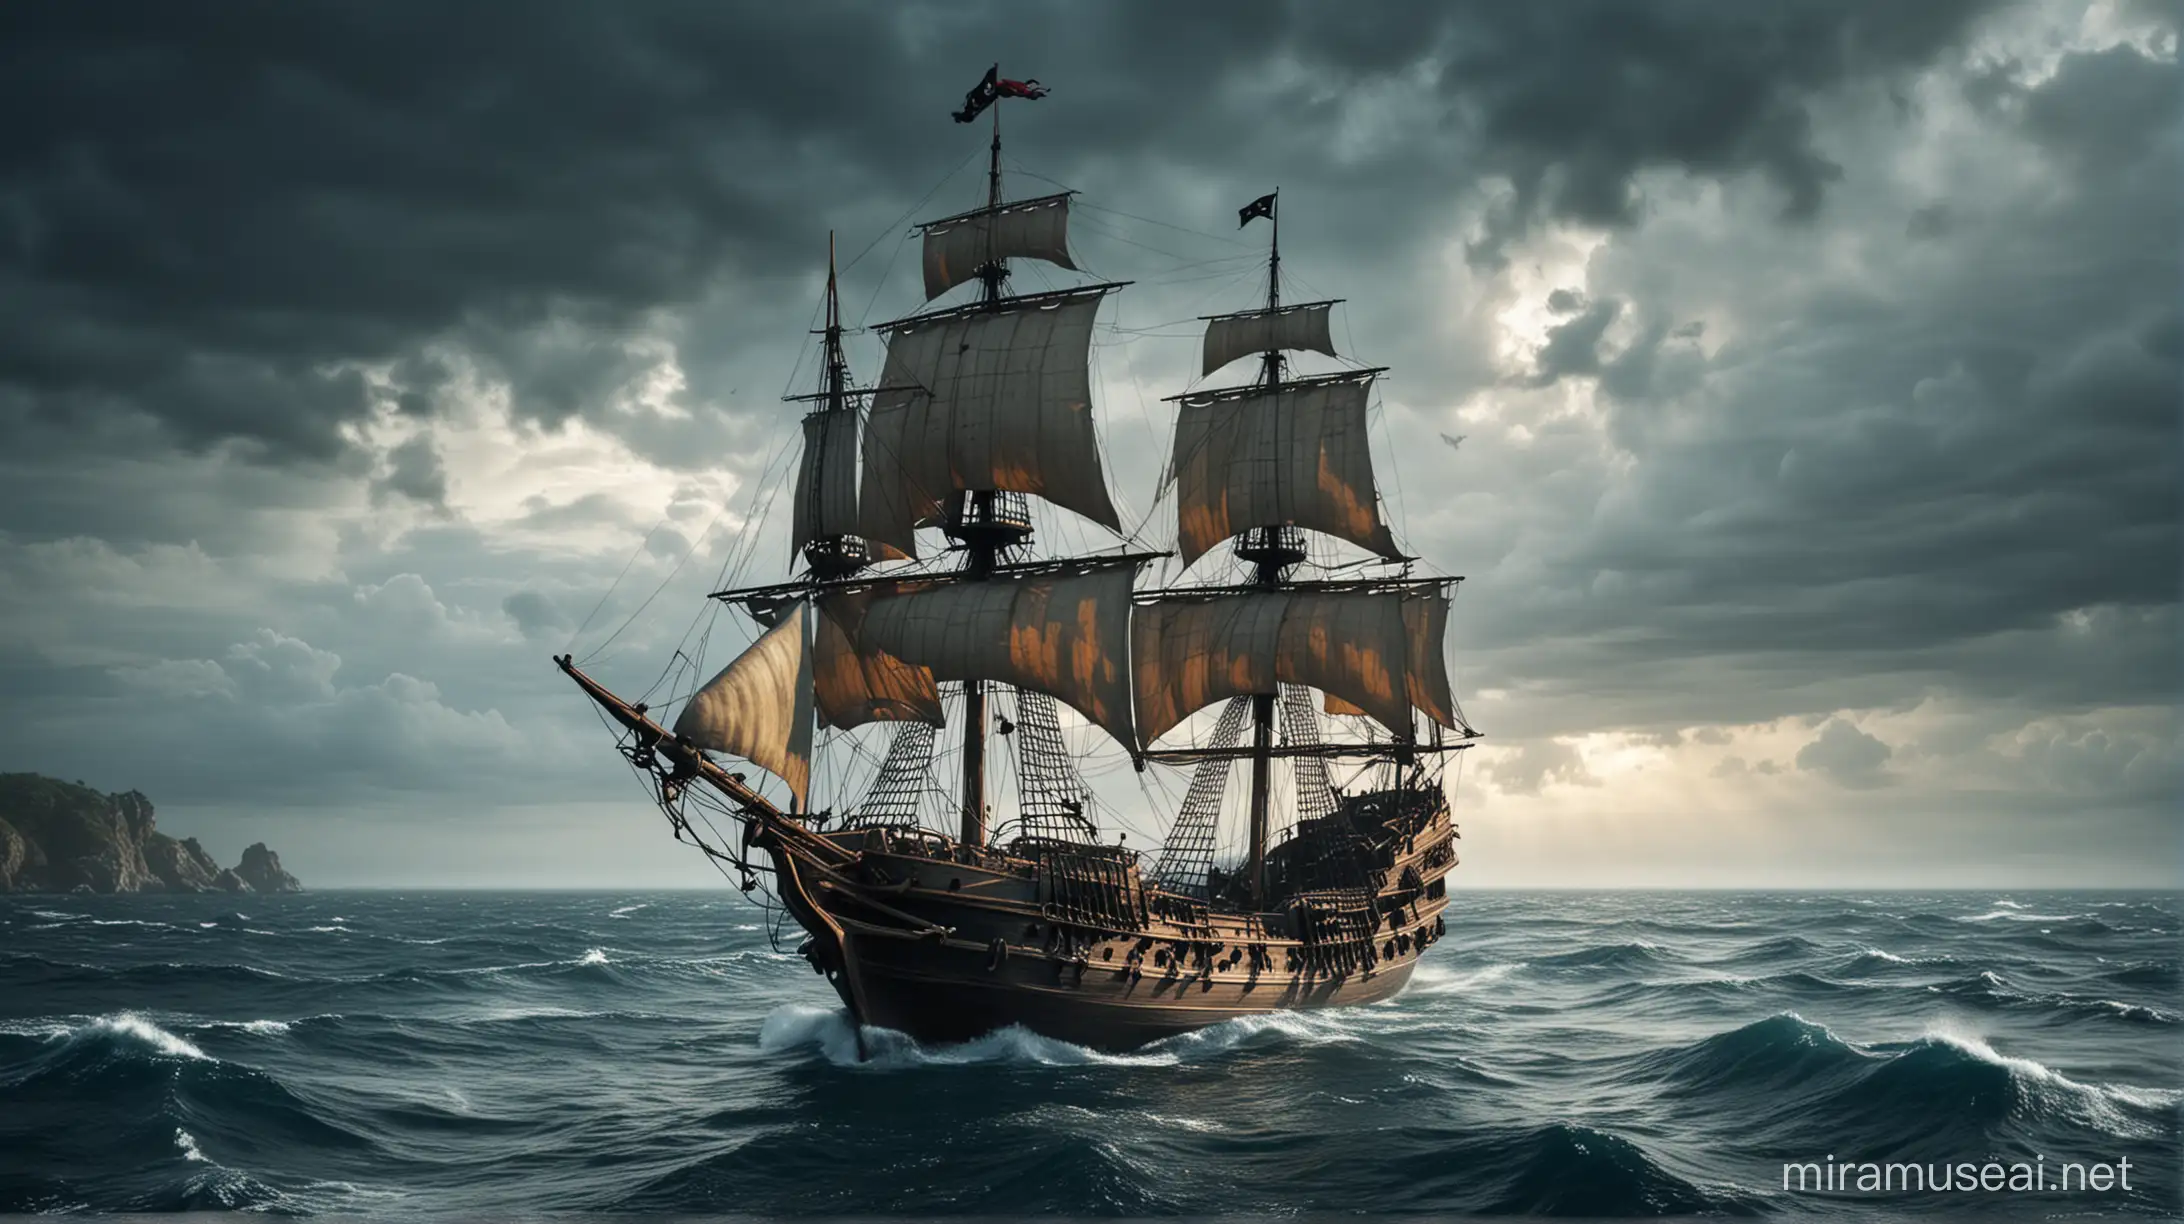 Pirates ship in the middle of ocean